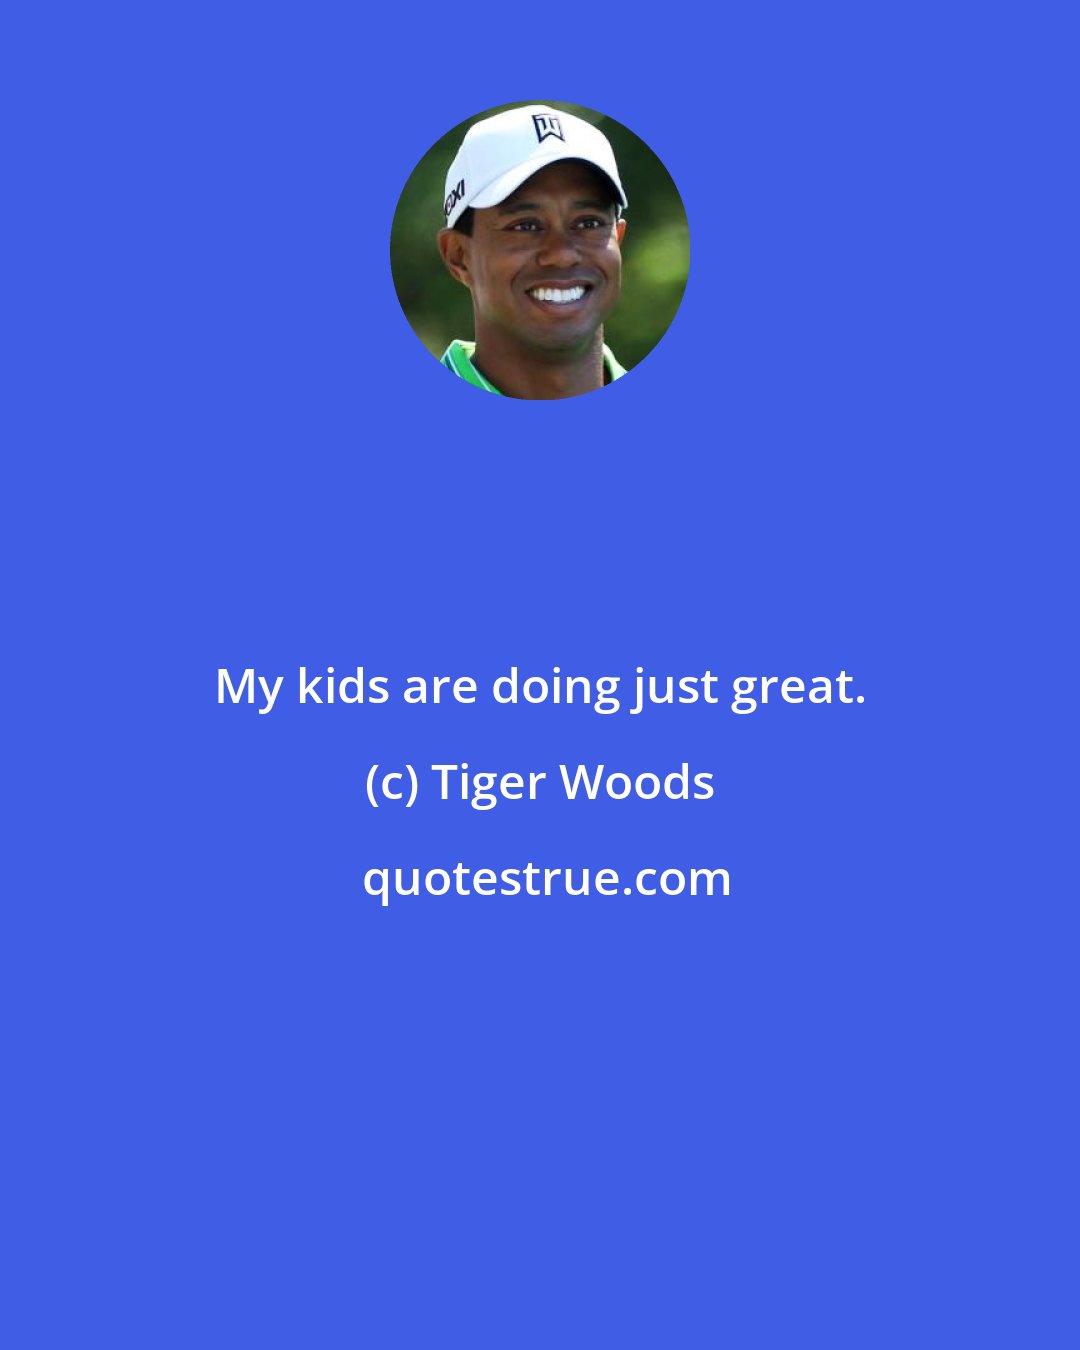 Tiger Woods: My kids are doing just great.